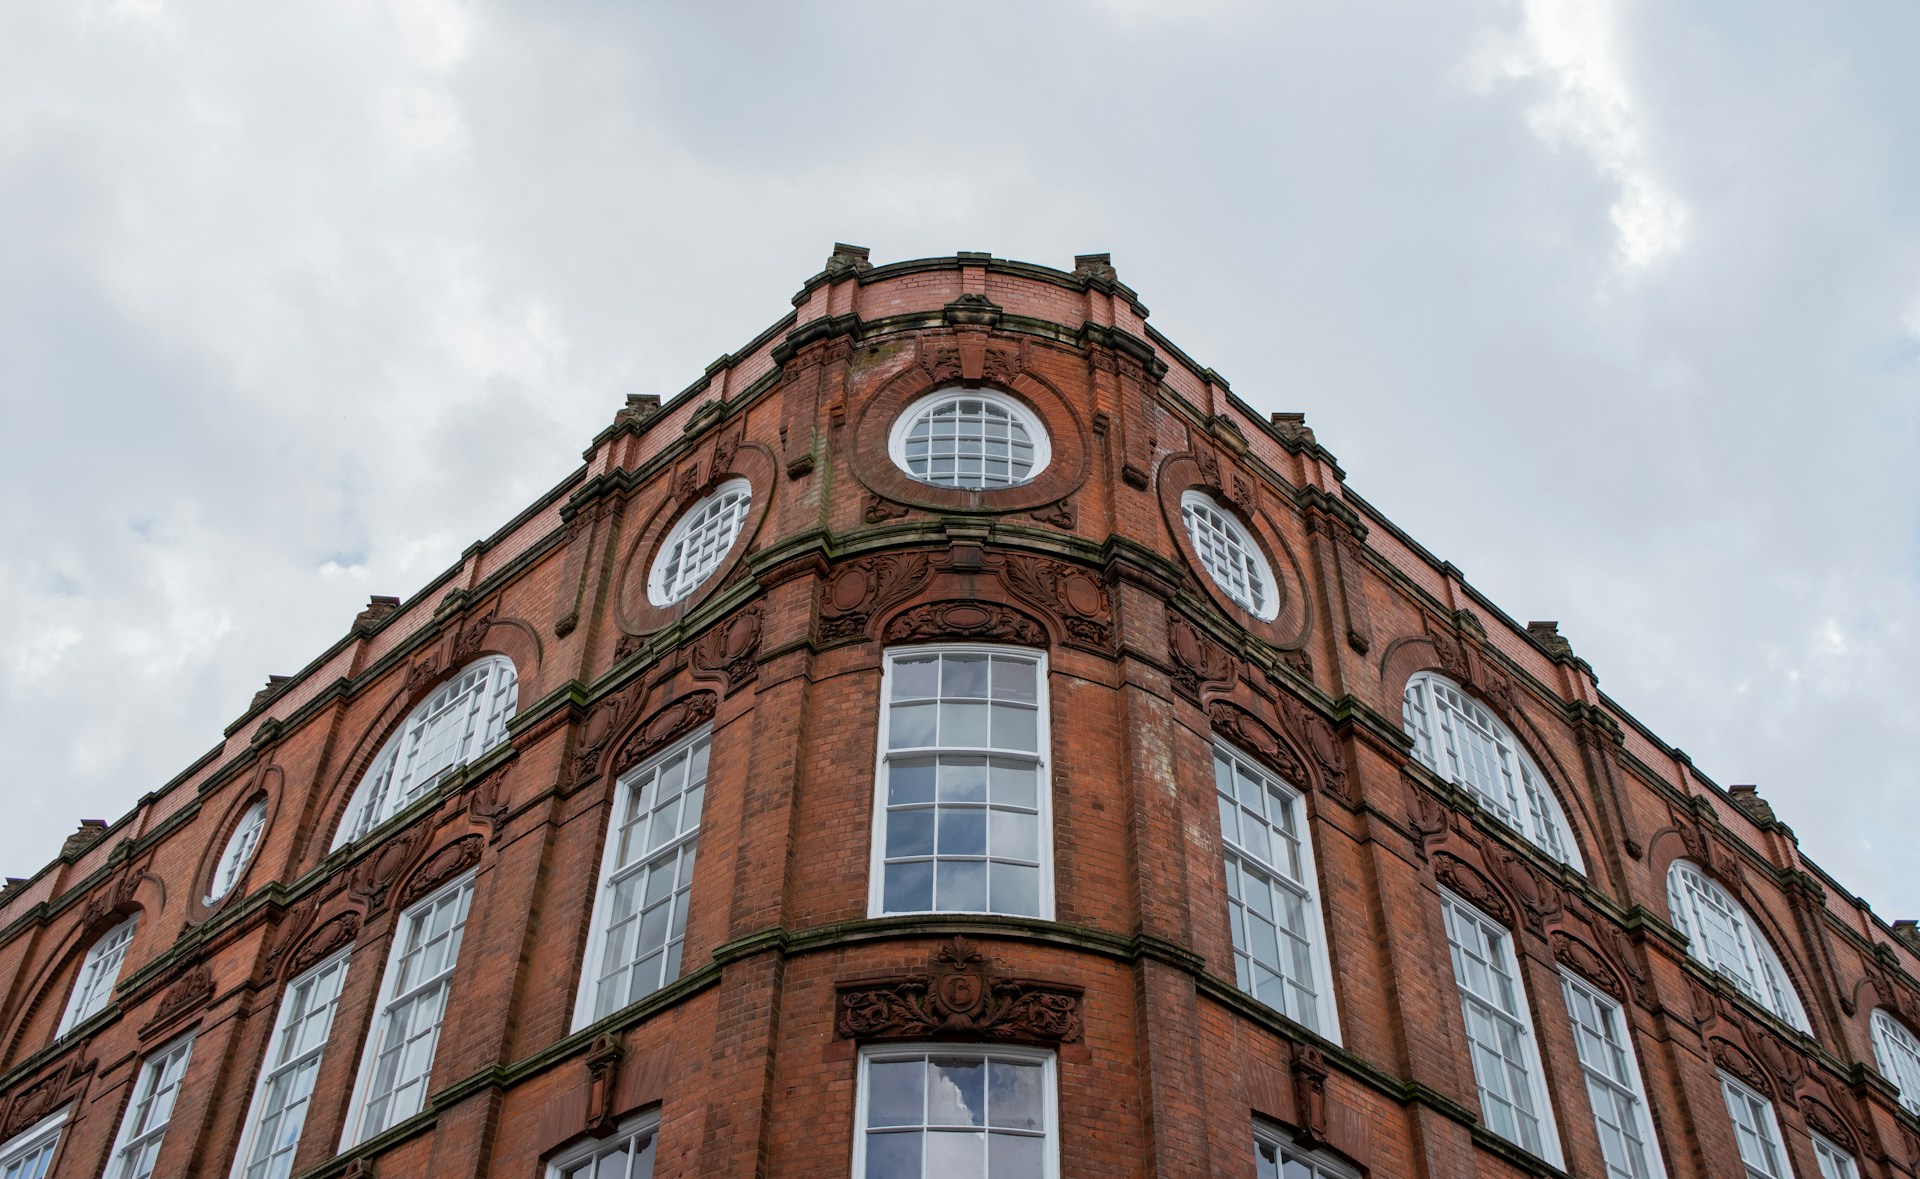 an image of a building in leicester